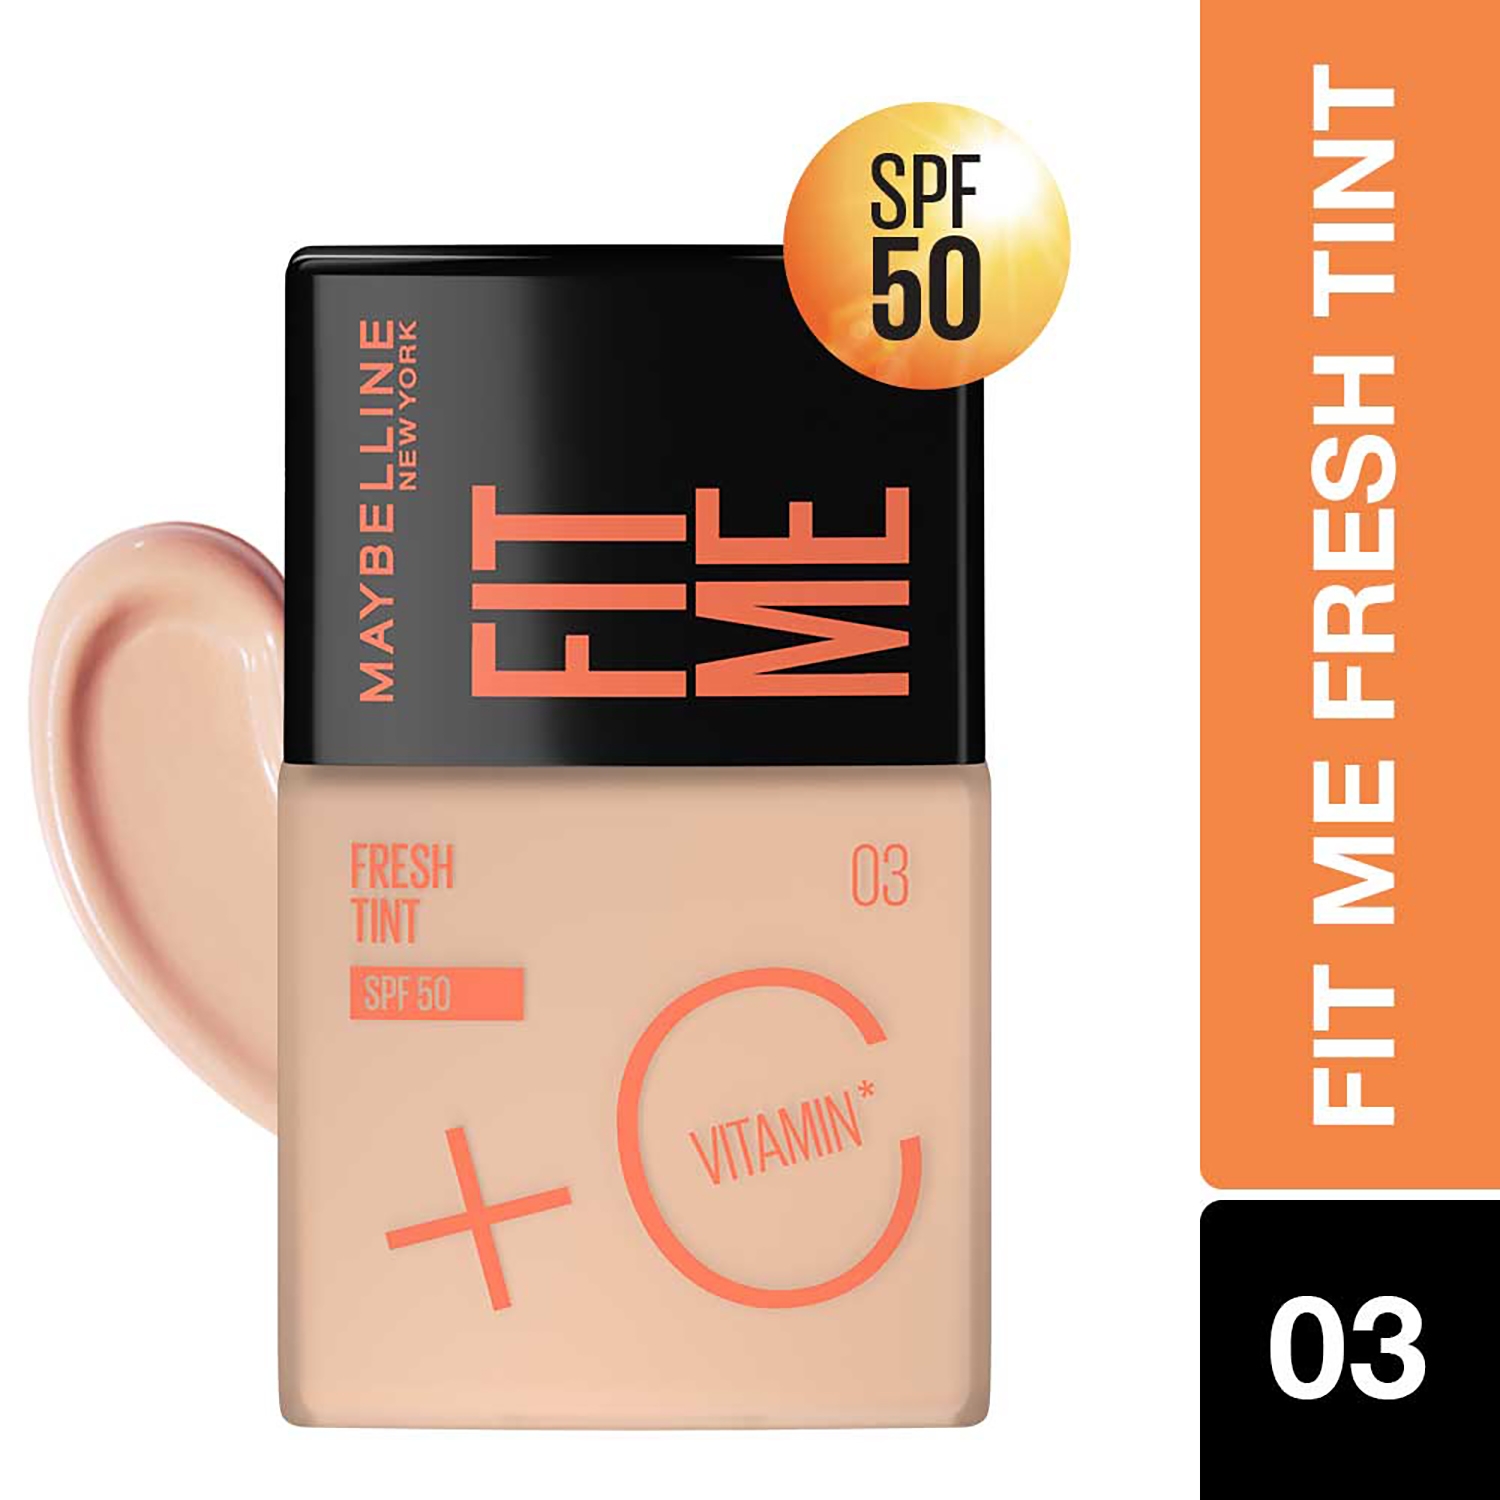 Maybelline New York | Maybelline New York Fit Me Fresh Tint With SPF 50 & Vitamin C - 03 Shade (30ml)